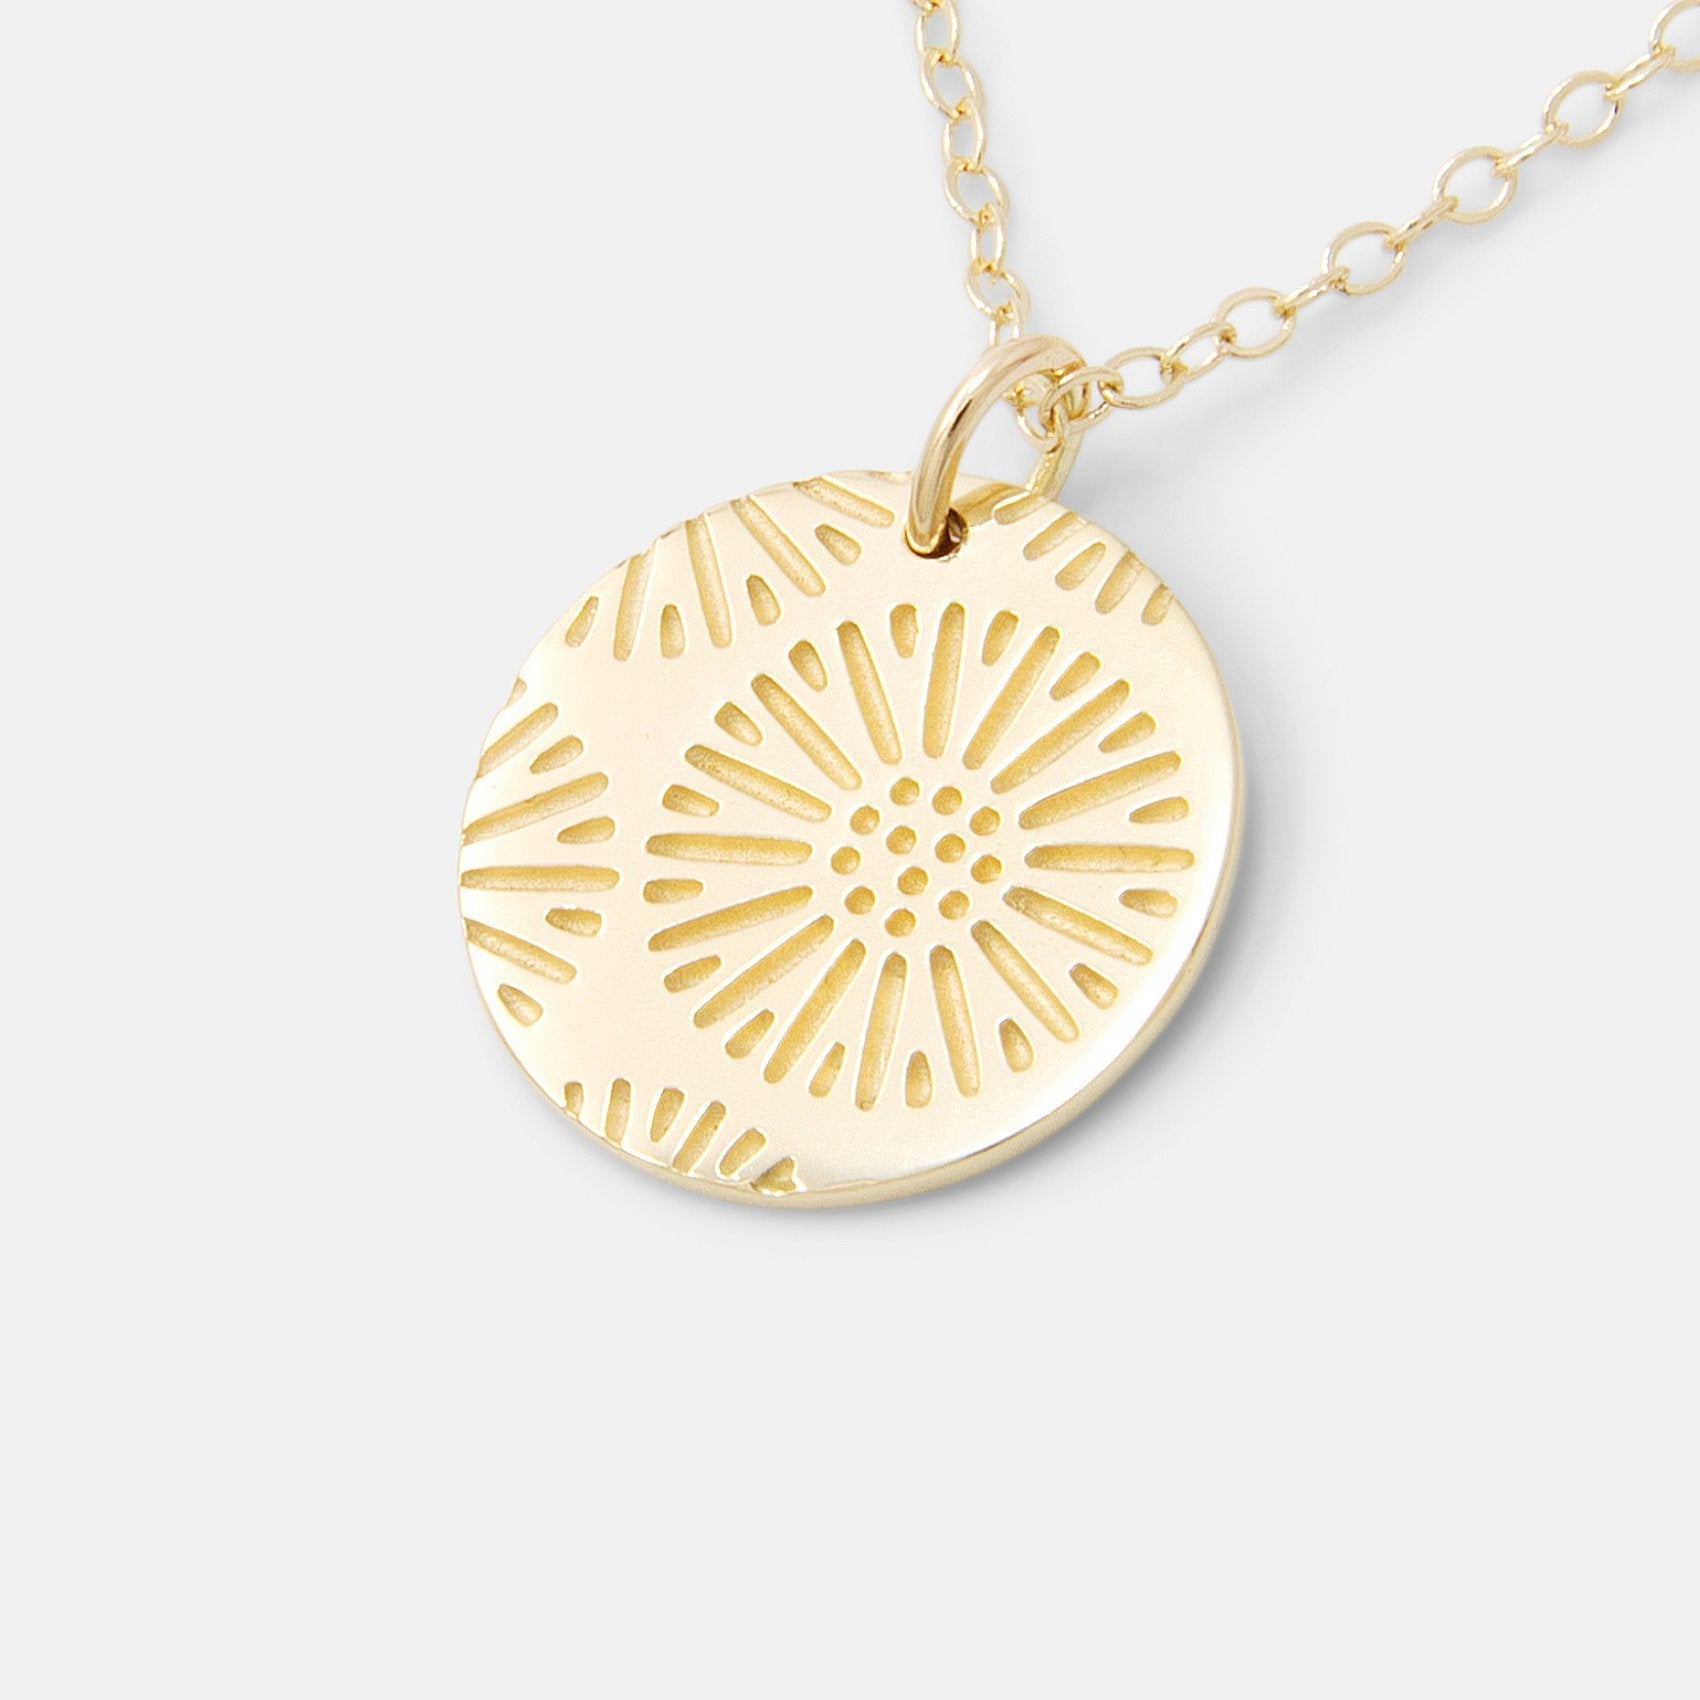 Coral texture solid gold pendant necklace - Simone Walsh Jewellery Australia